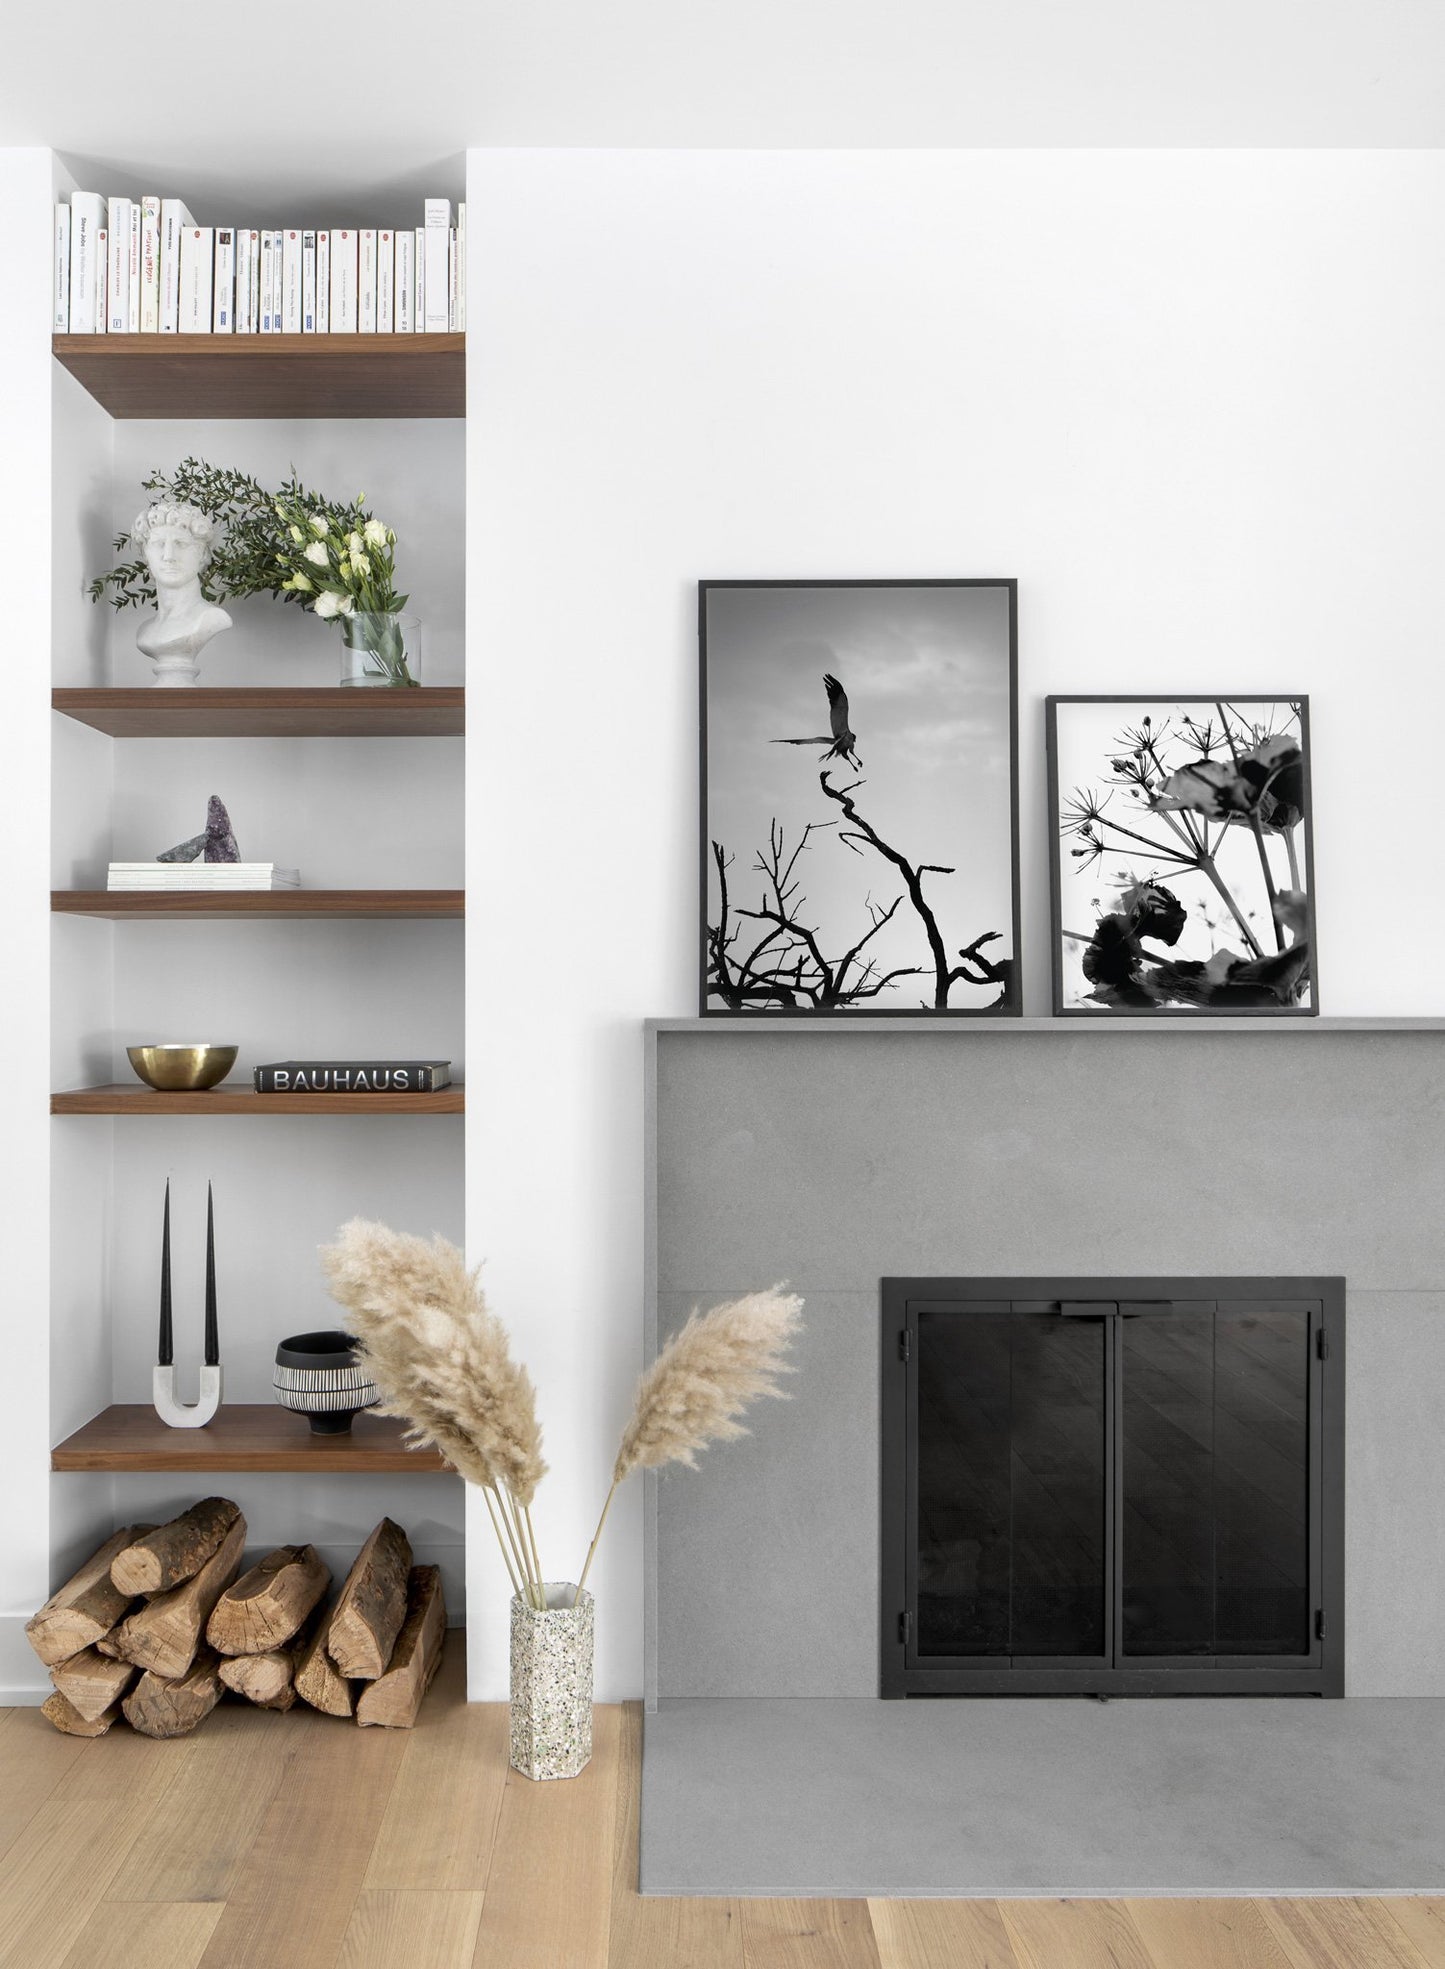 Wild Thing modern minimalist black and white nature photography poster by Opposite Wall - Duo - Living Room Fireplace